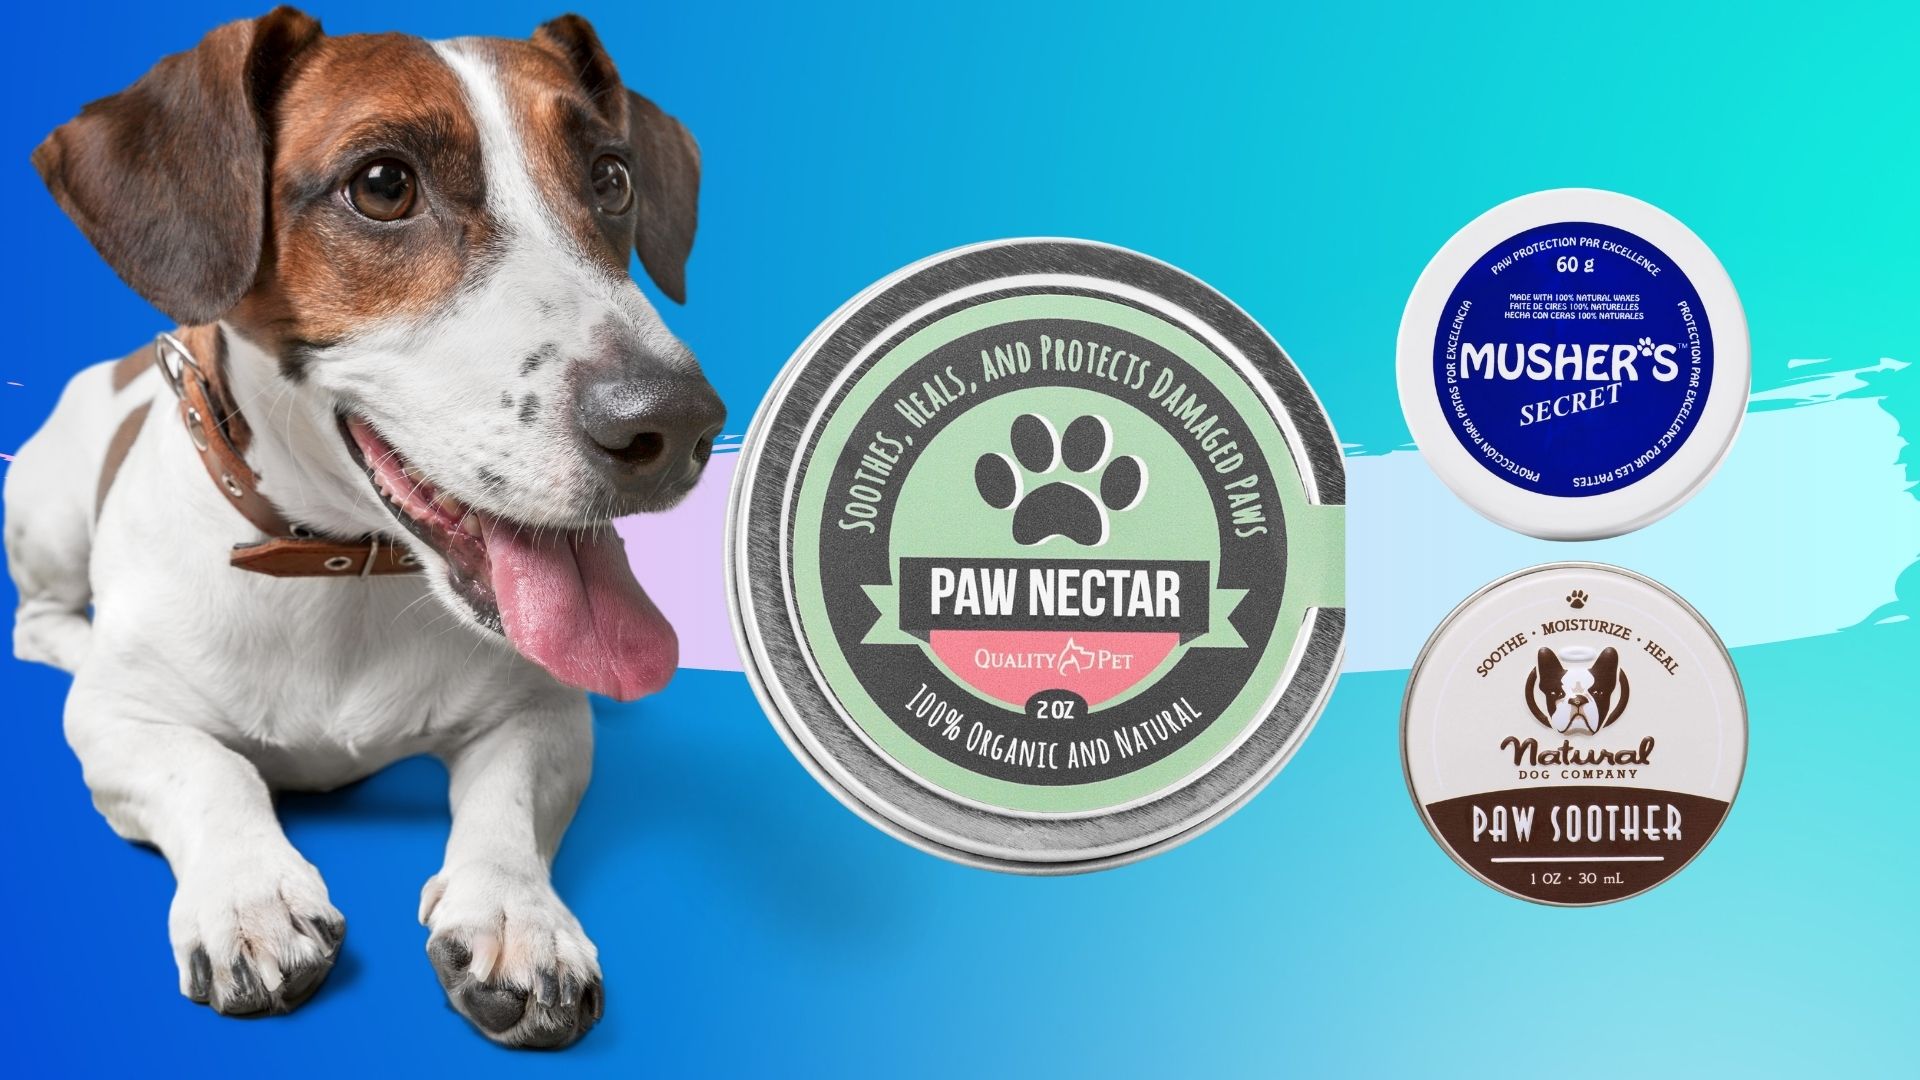 Dog Paw Balm Stick with coconut oil, shea butter & beeswax – legitpet